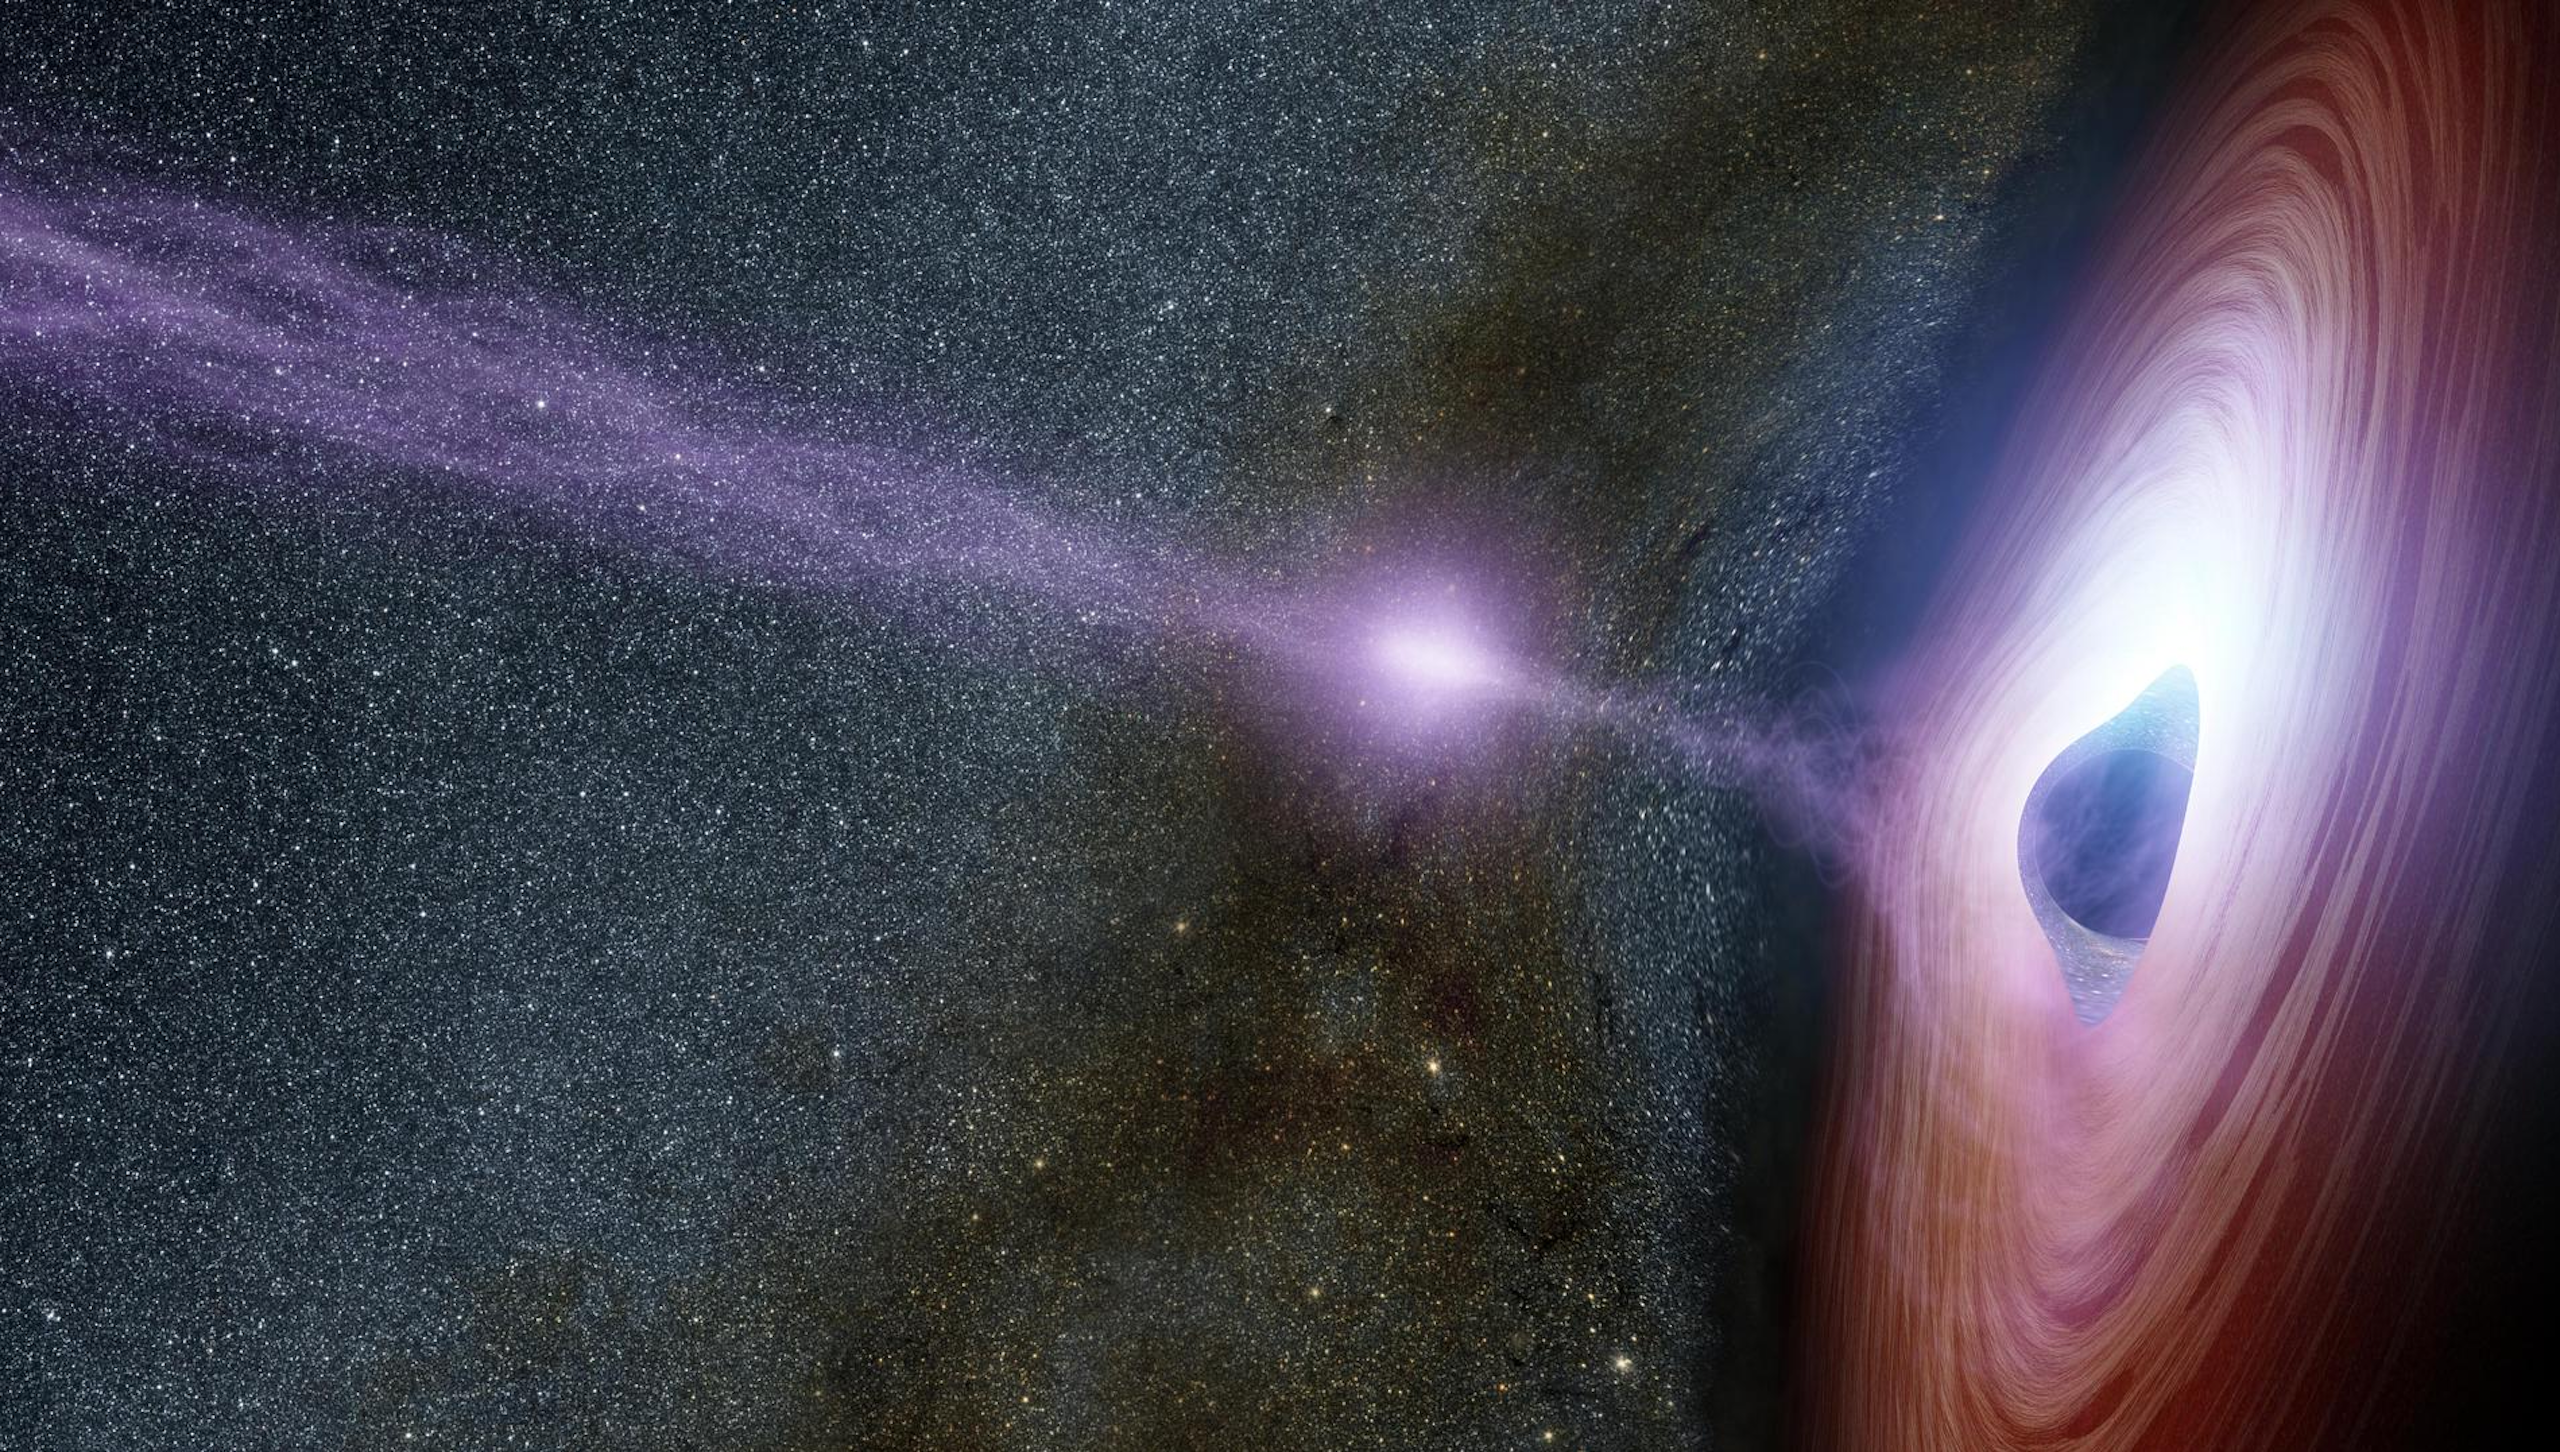 An illustration of a supermassive black hole with a swirling disk of material moving into its spherical center. 